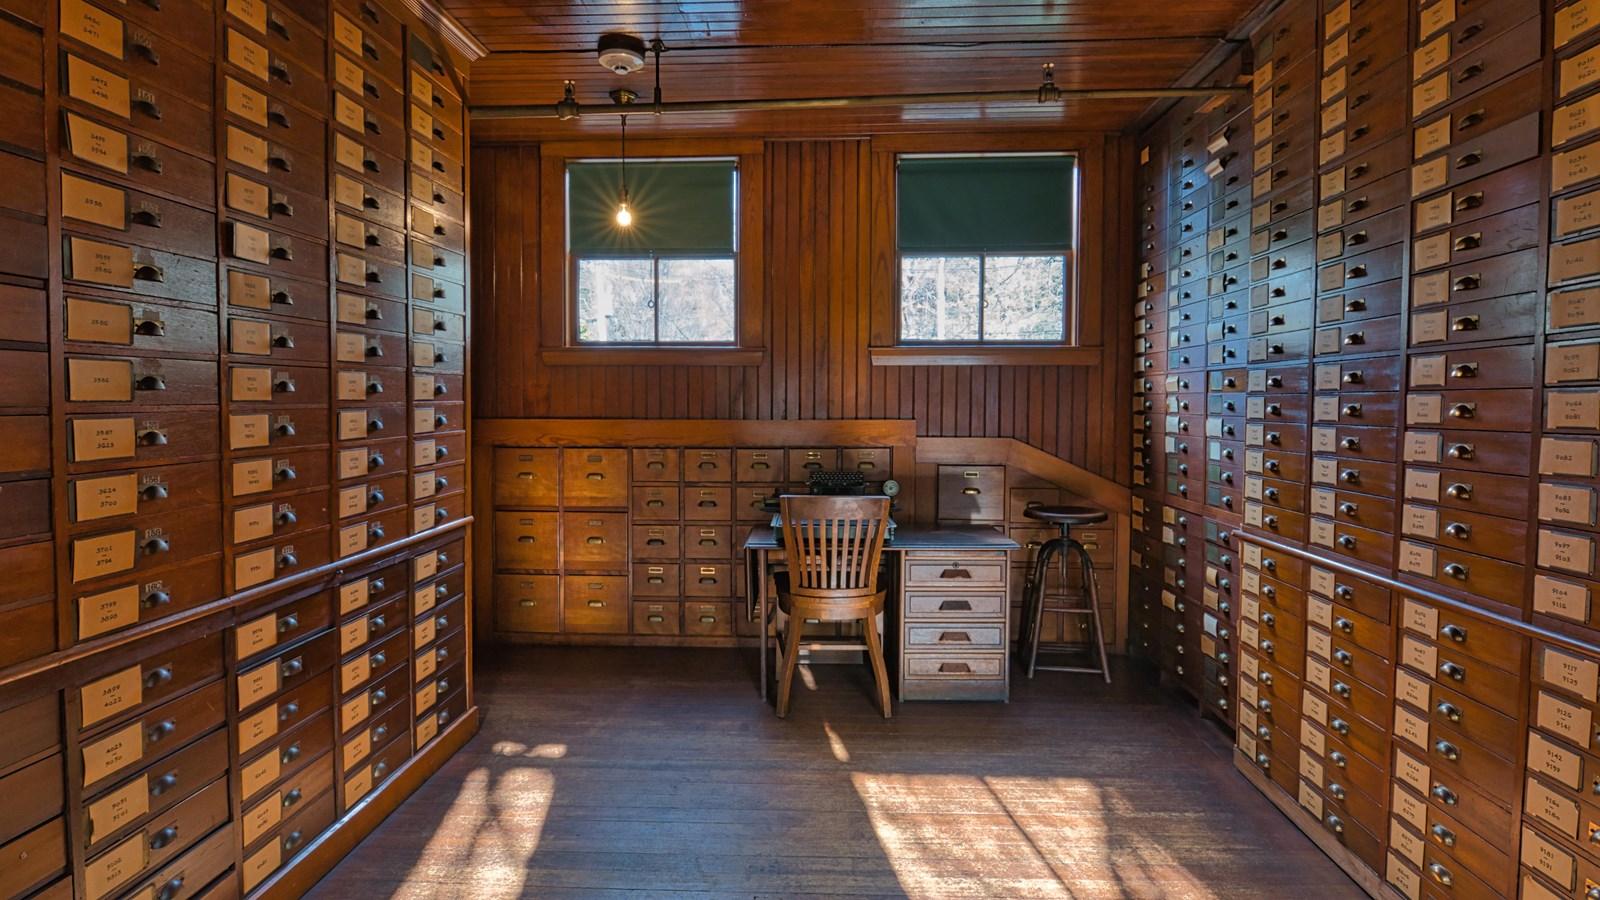 Room with wooded drawers along all the walls